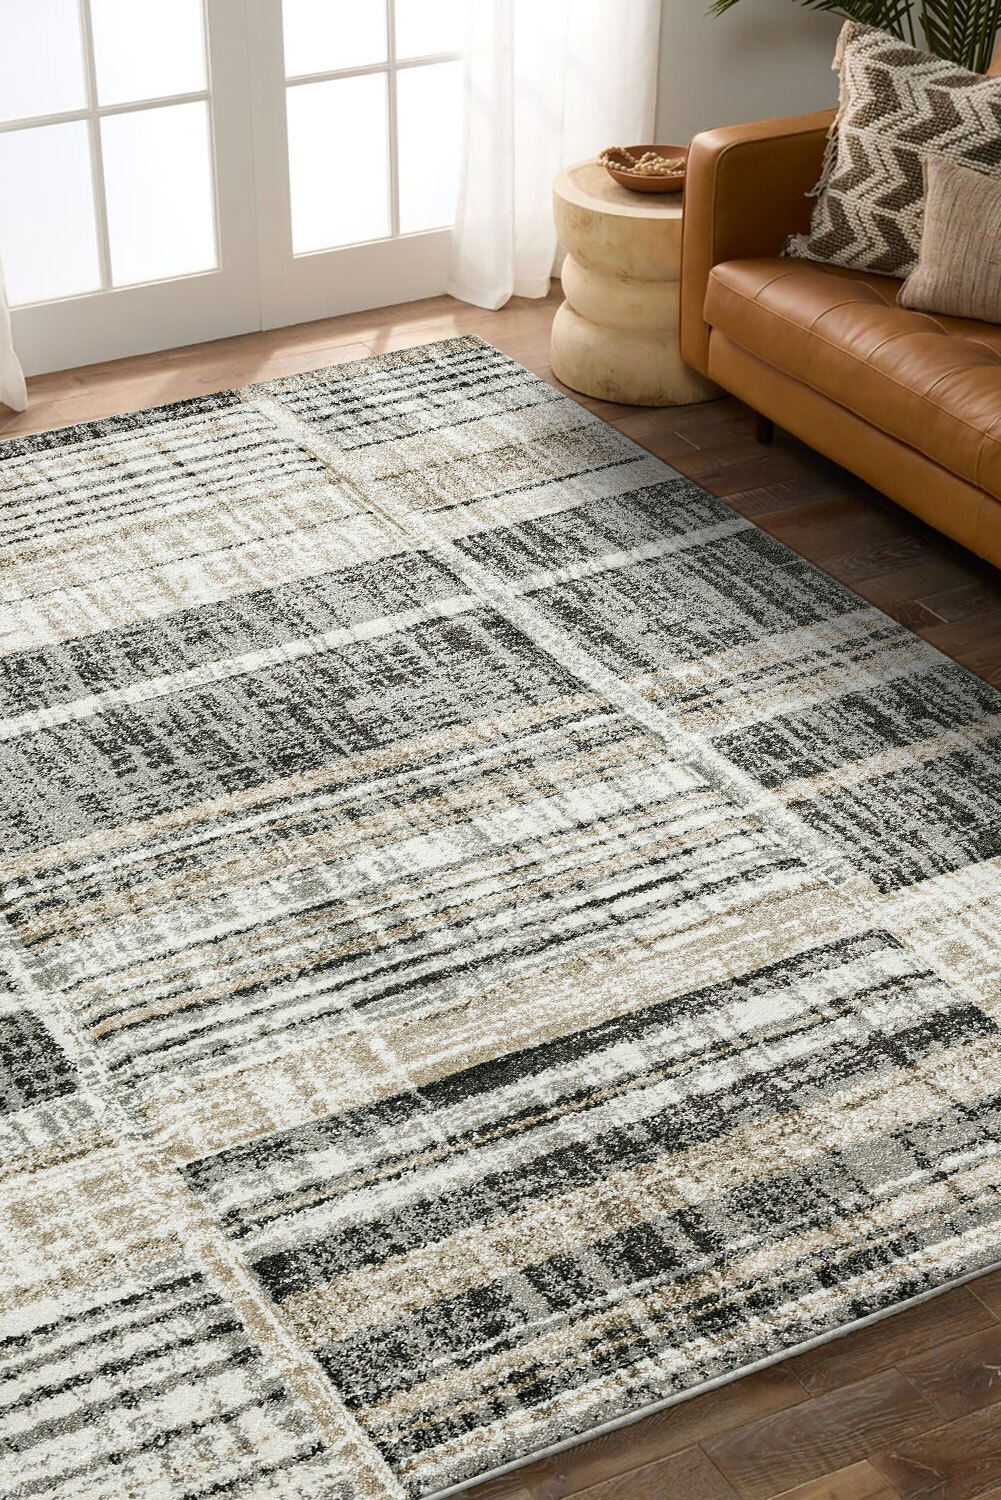 Amsterdam Striped Carved Rug(Size 230 x 160cm)